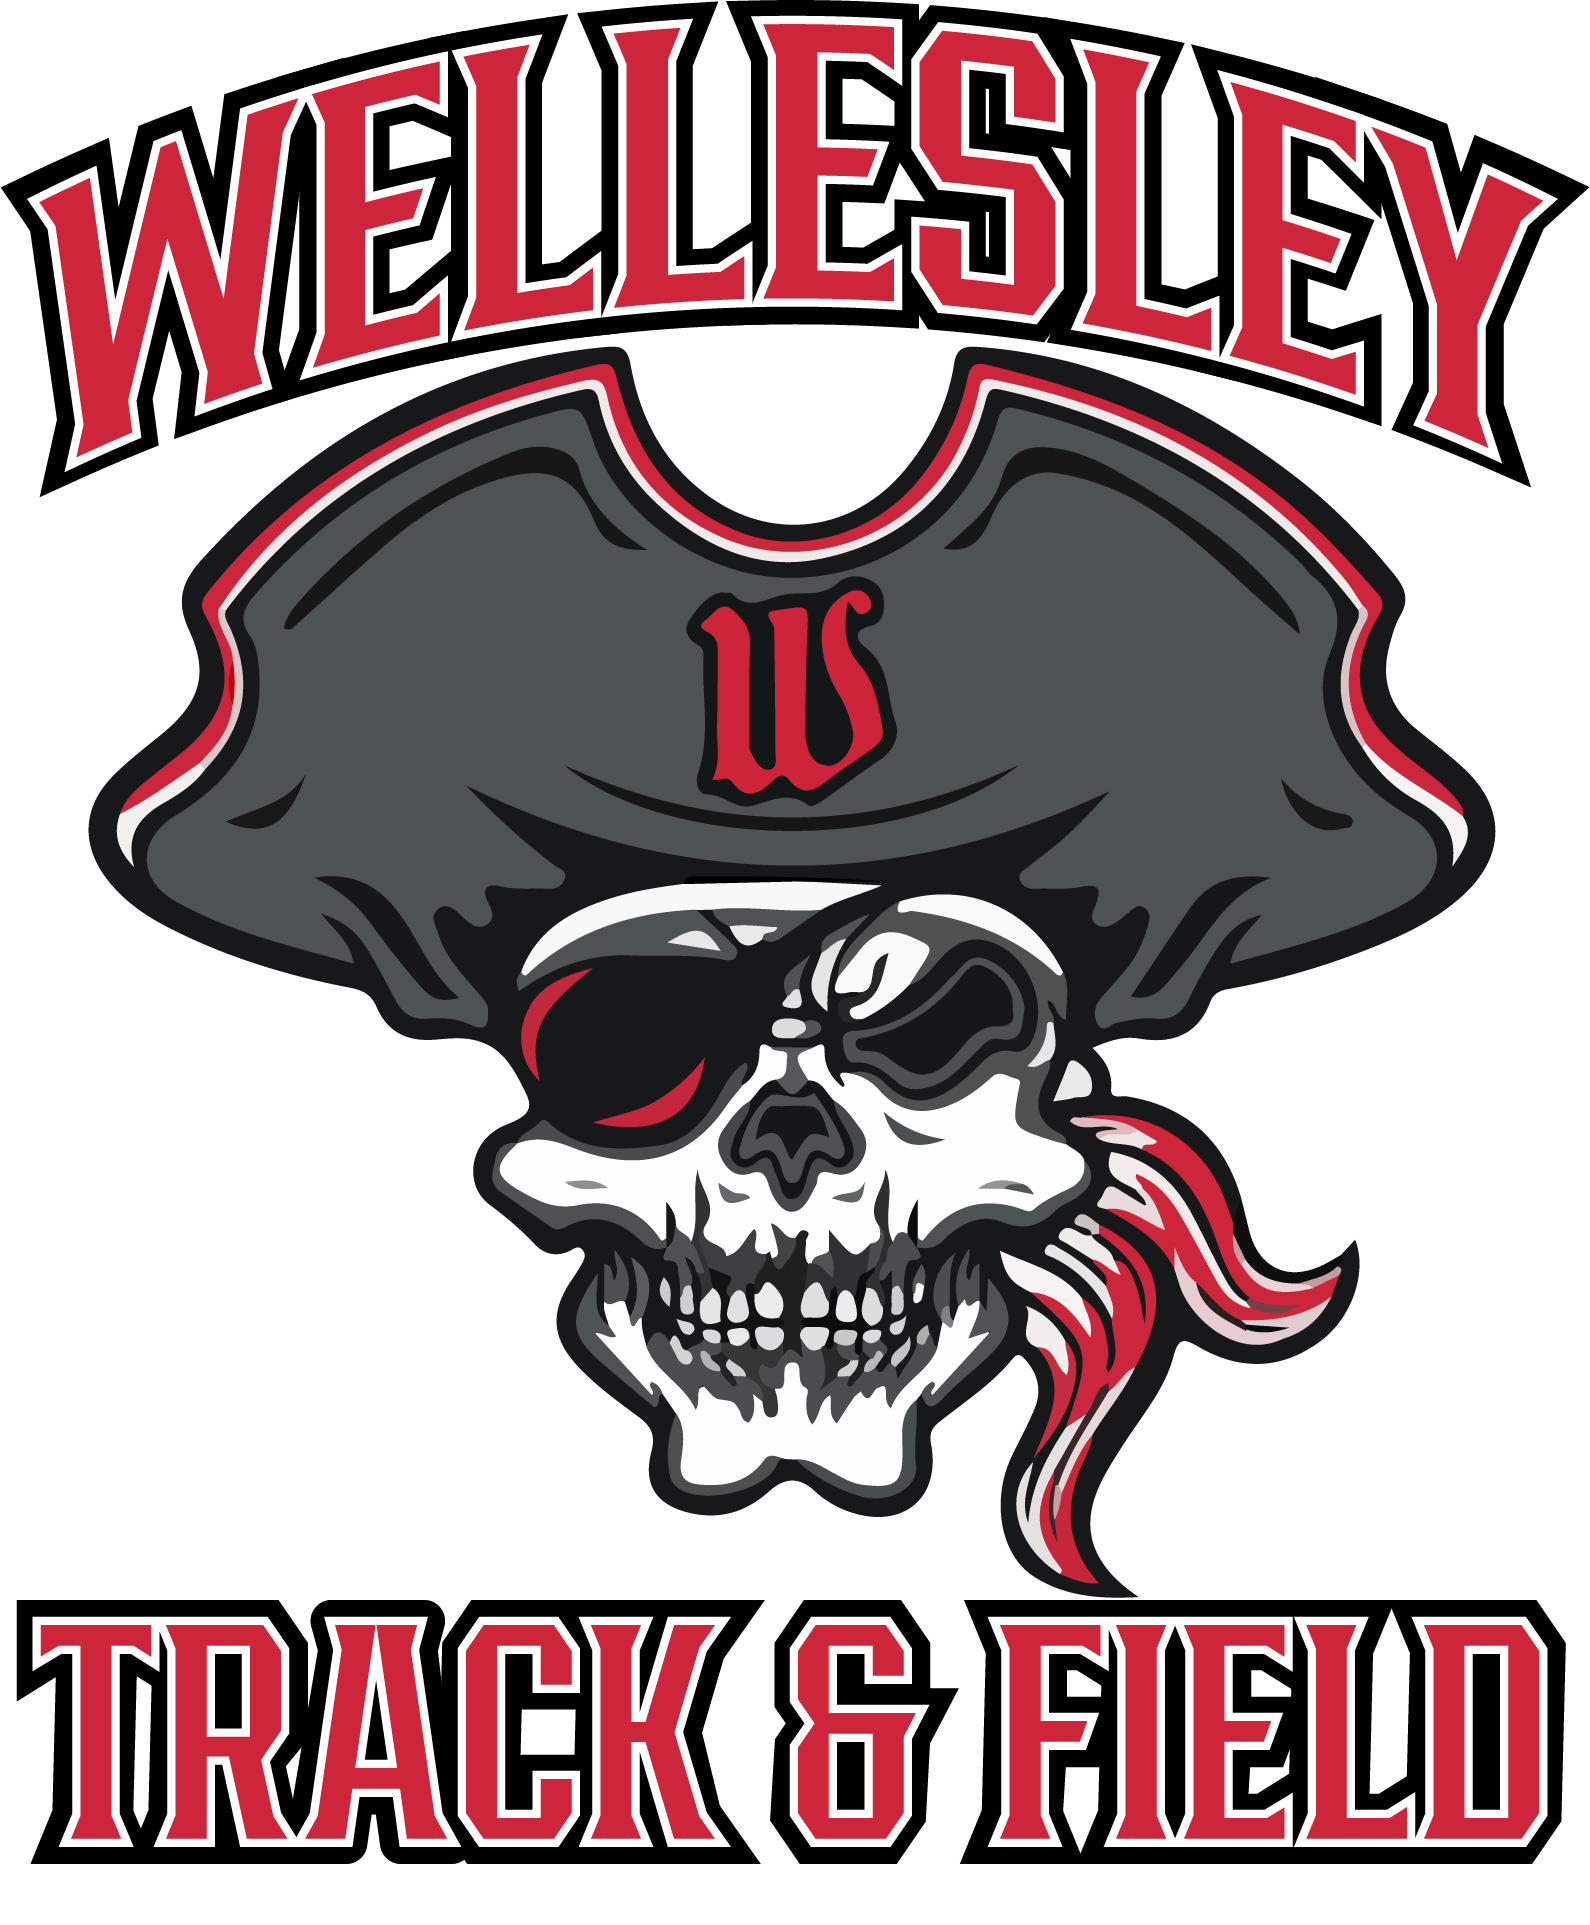 Wellesley Track & Field and Cross Country